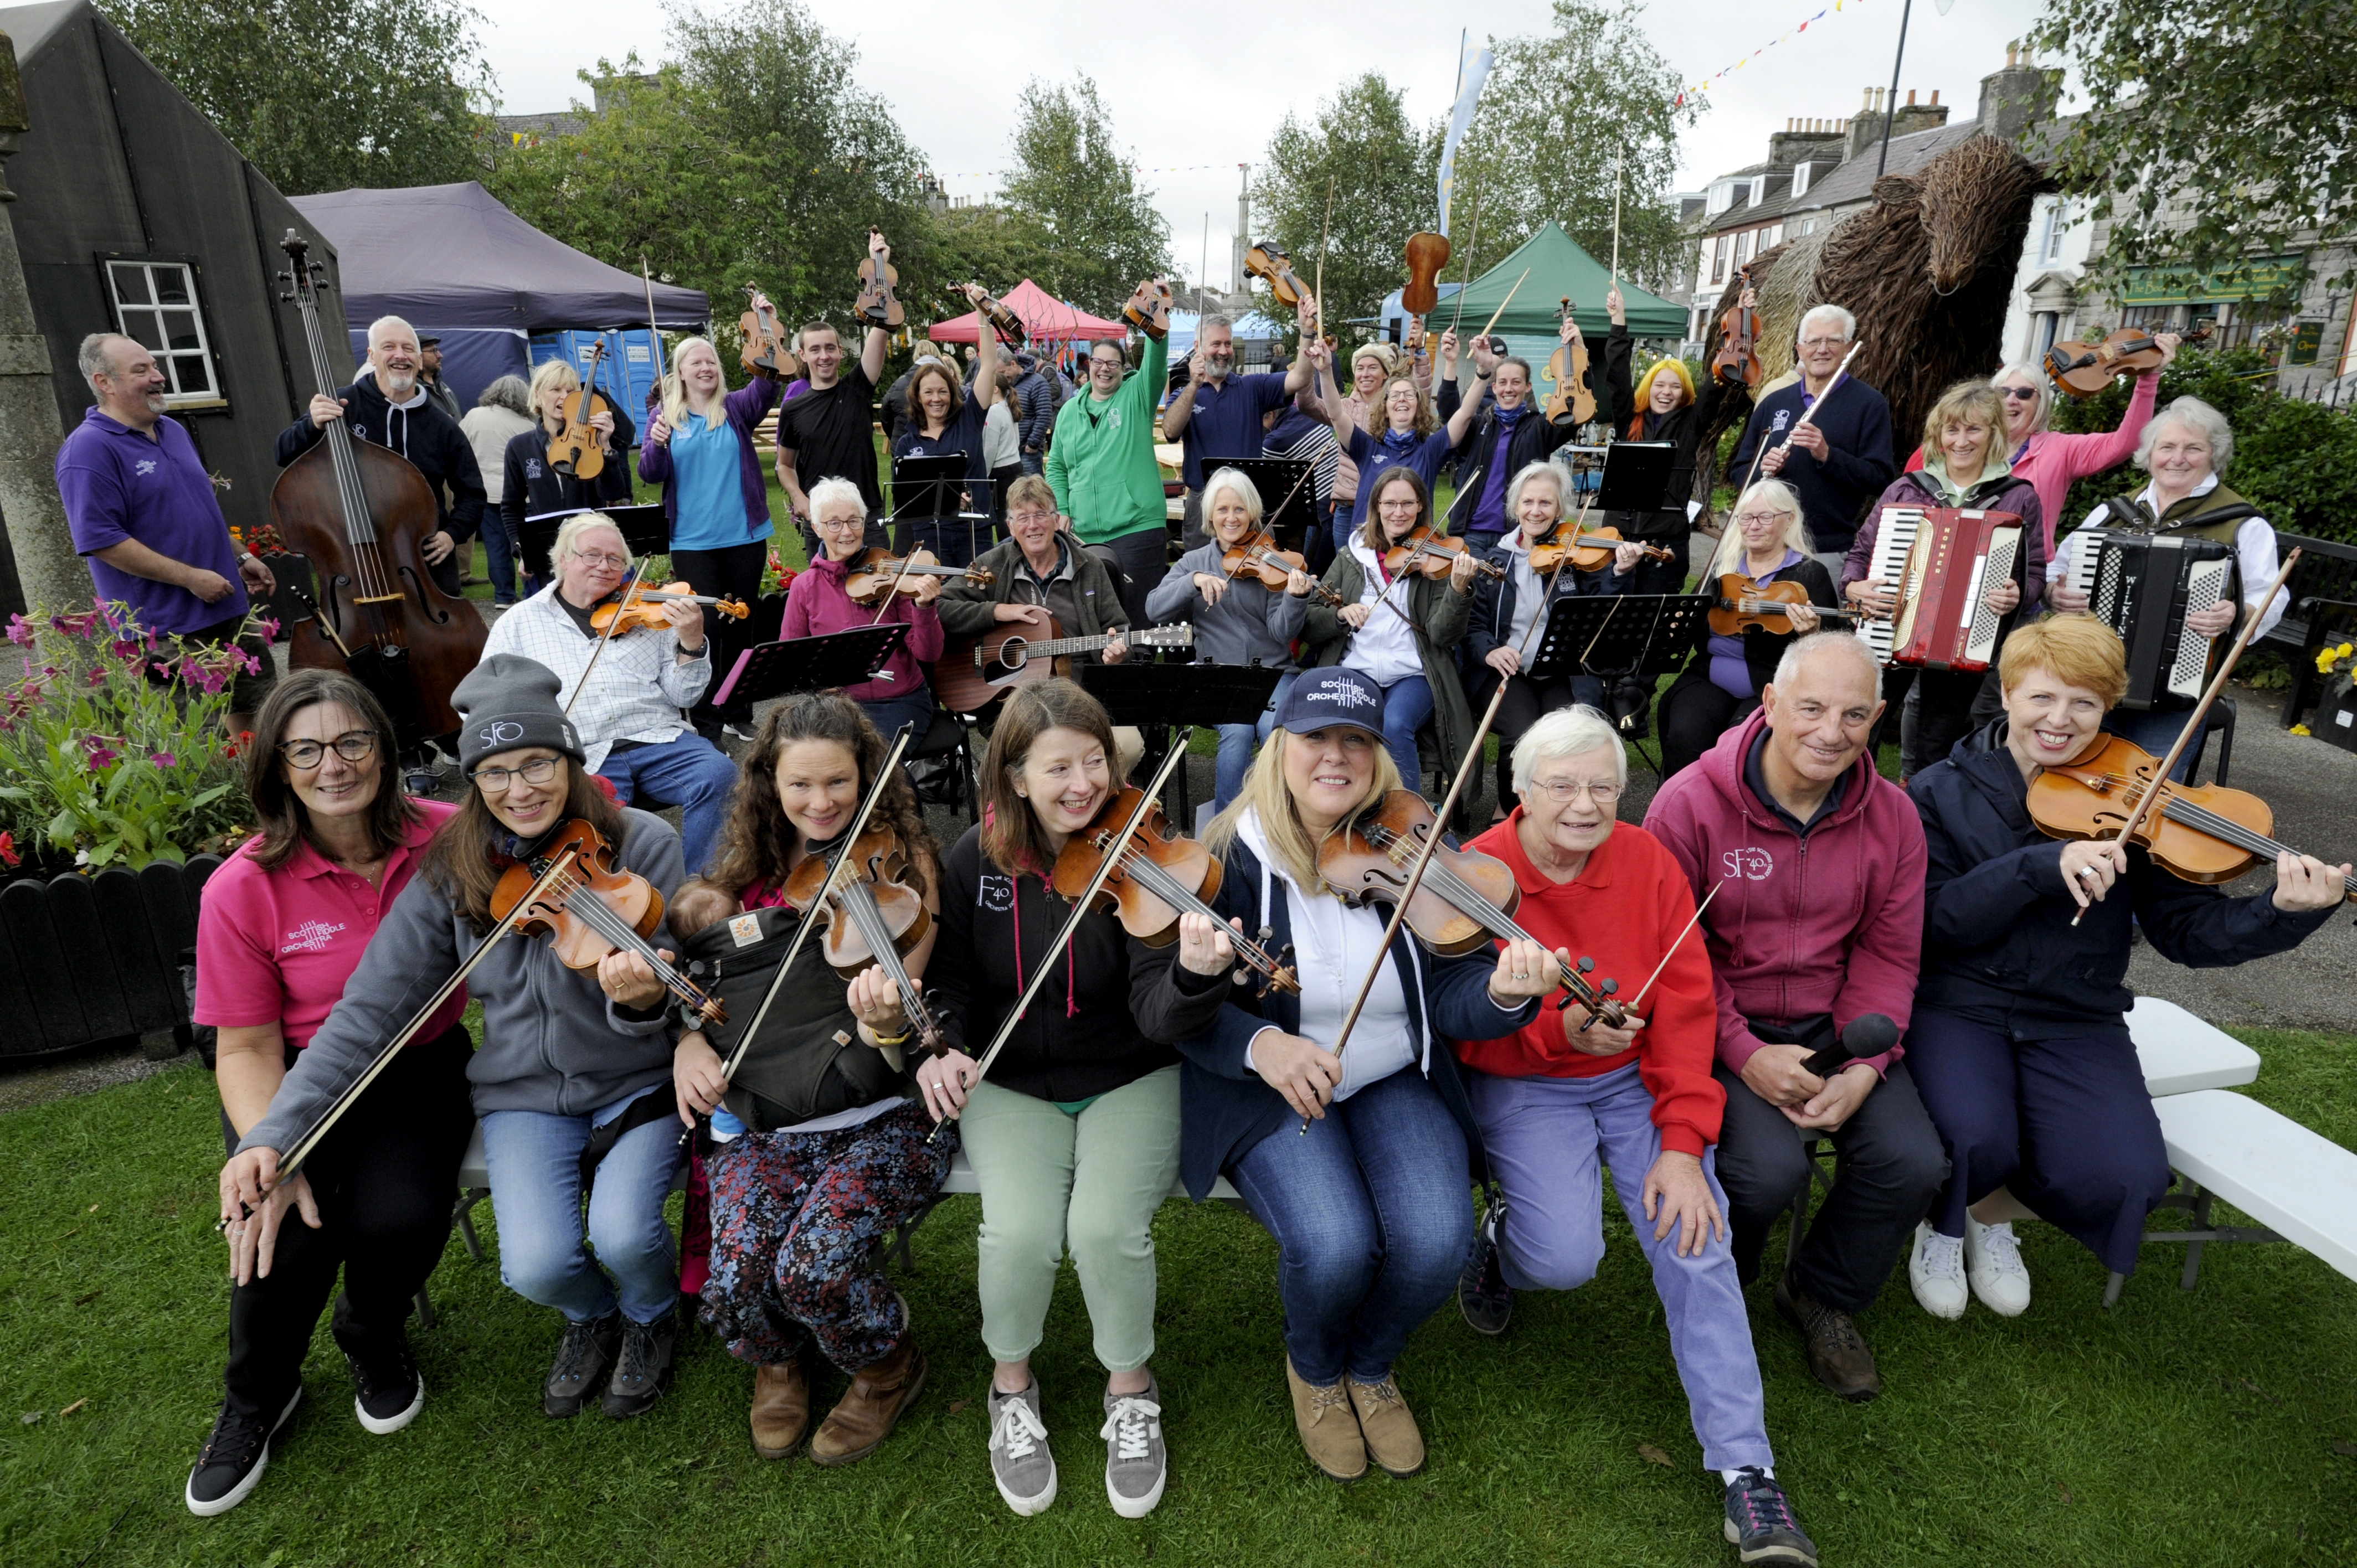 Many people sitting in the Wigtown gardens playing fiddles for the Fiddlers Fair outdoor event at the Wigtown Book Festival. . A few have guitars and accordions, another has a double bass. The players in the background are raising their instruments in a cheer.